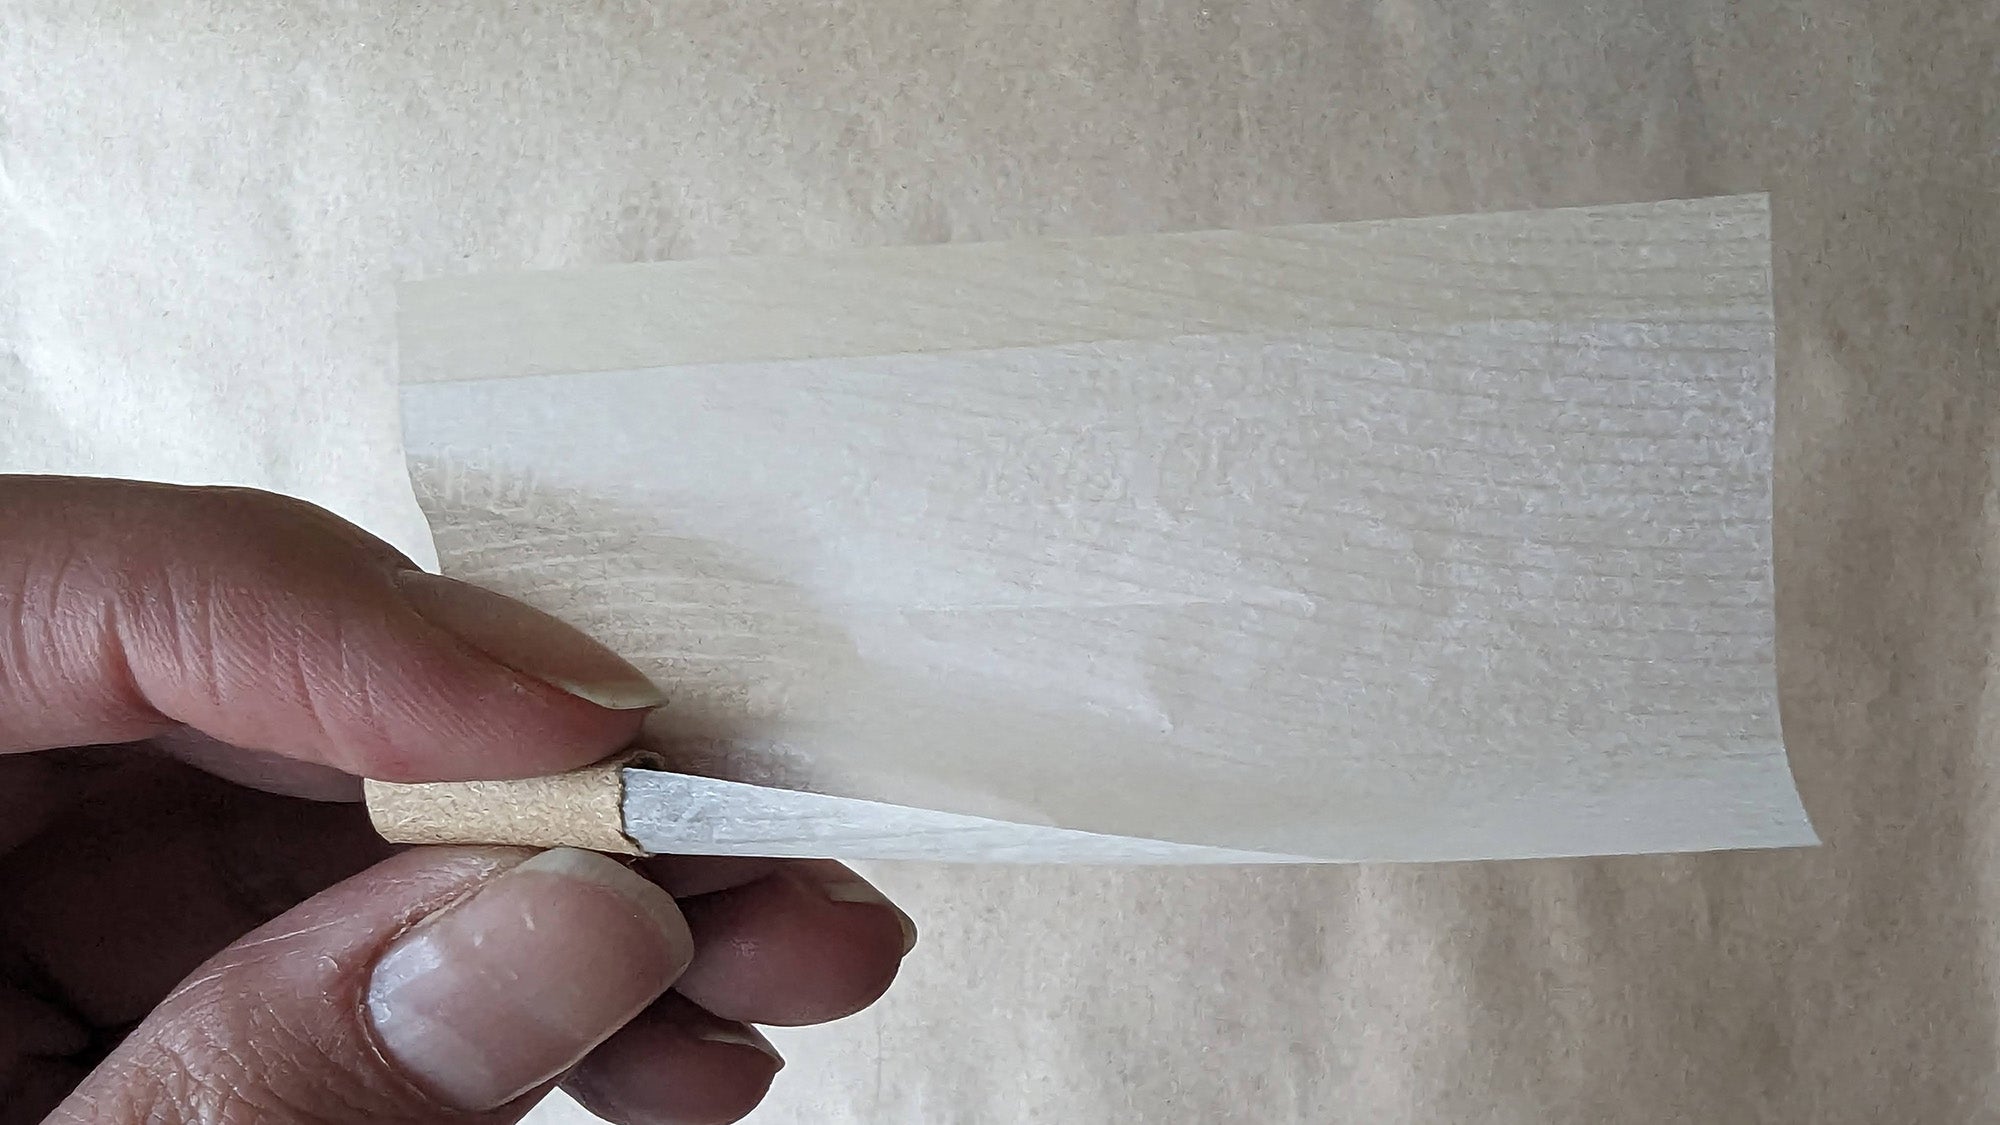 Hand holding a smoking paper with a cardboard tip on the left side.